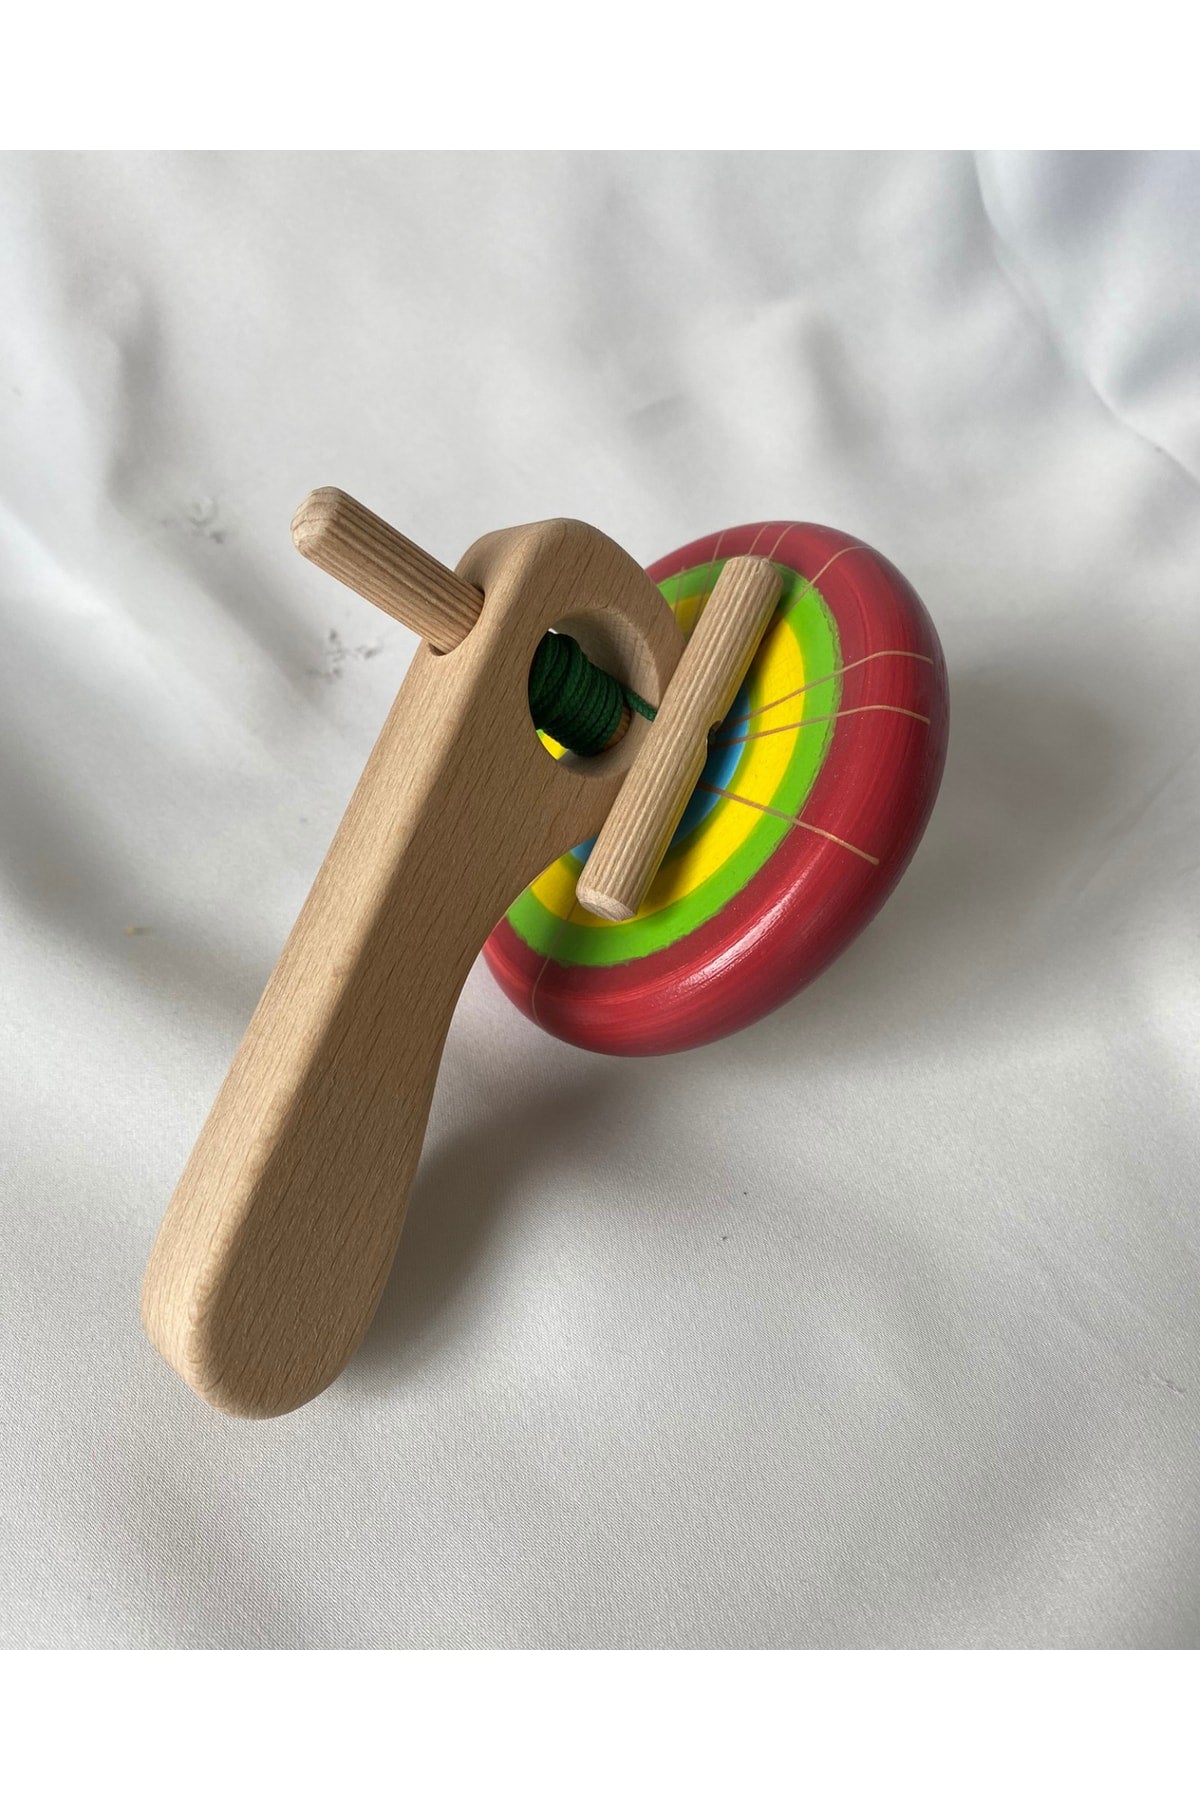 Wooden Pull Throw Spinning Top Colorful Patterned Drawstring Spinning Top Natural Wooden Toy